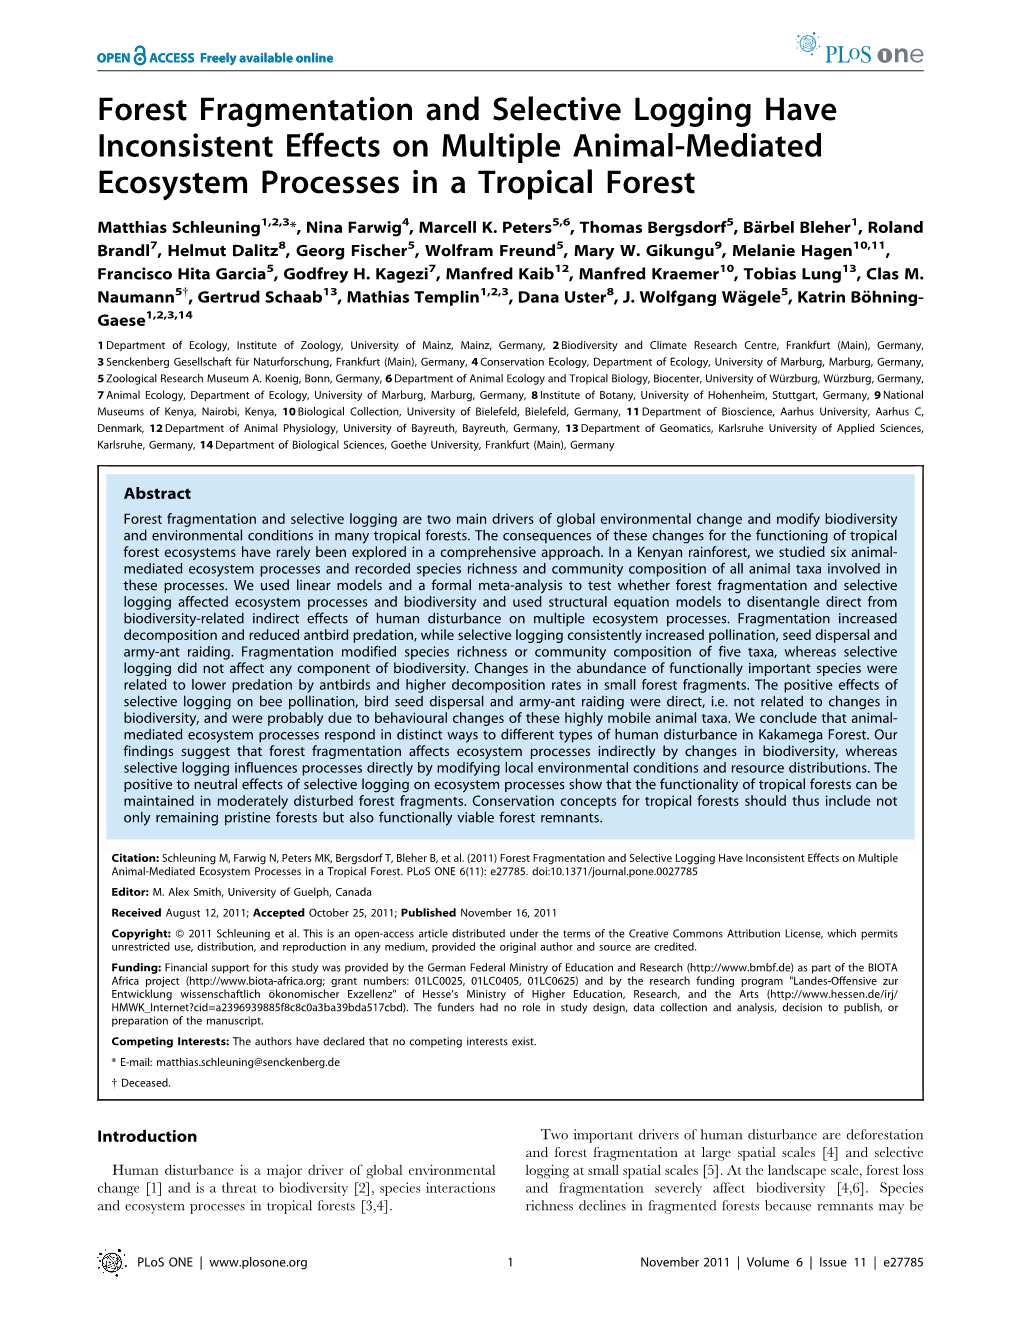 Forest Fragmentation and Selective Logging Have Inconsistent Effects on Multiple Animal-Mediated Ecosystem Processes in a Tropical Forest